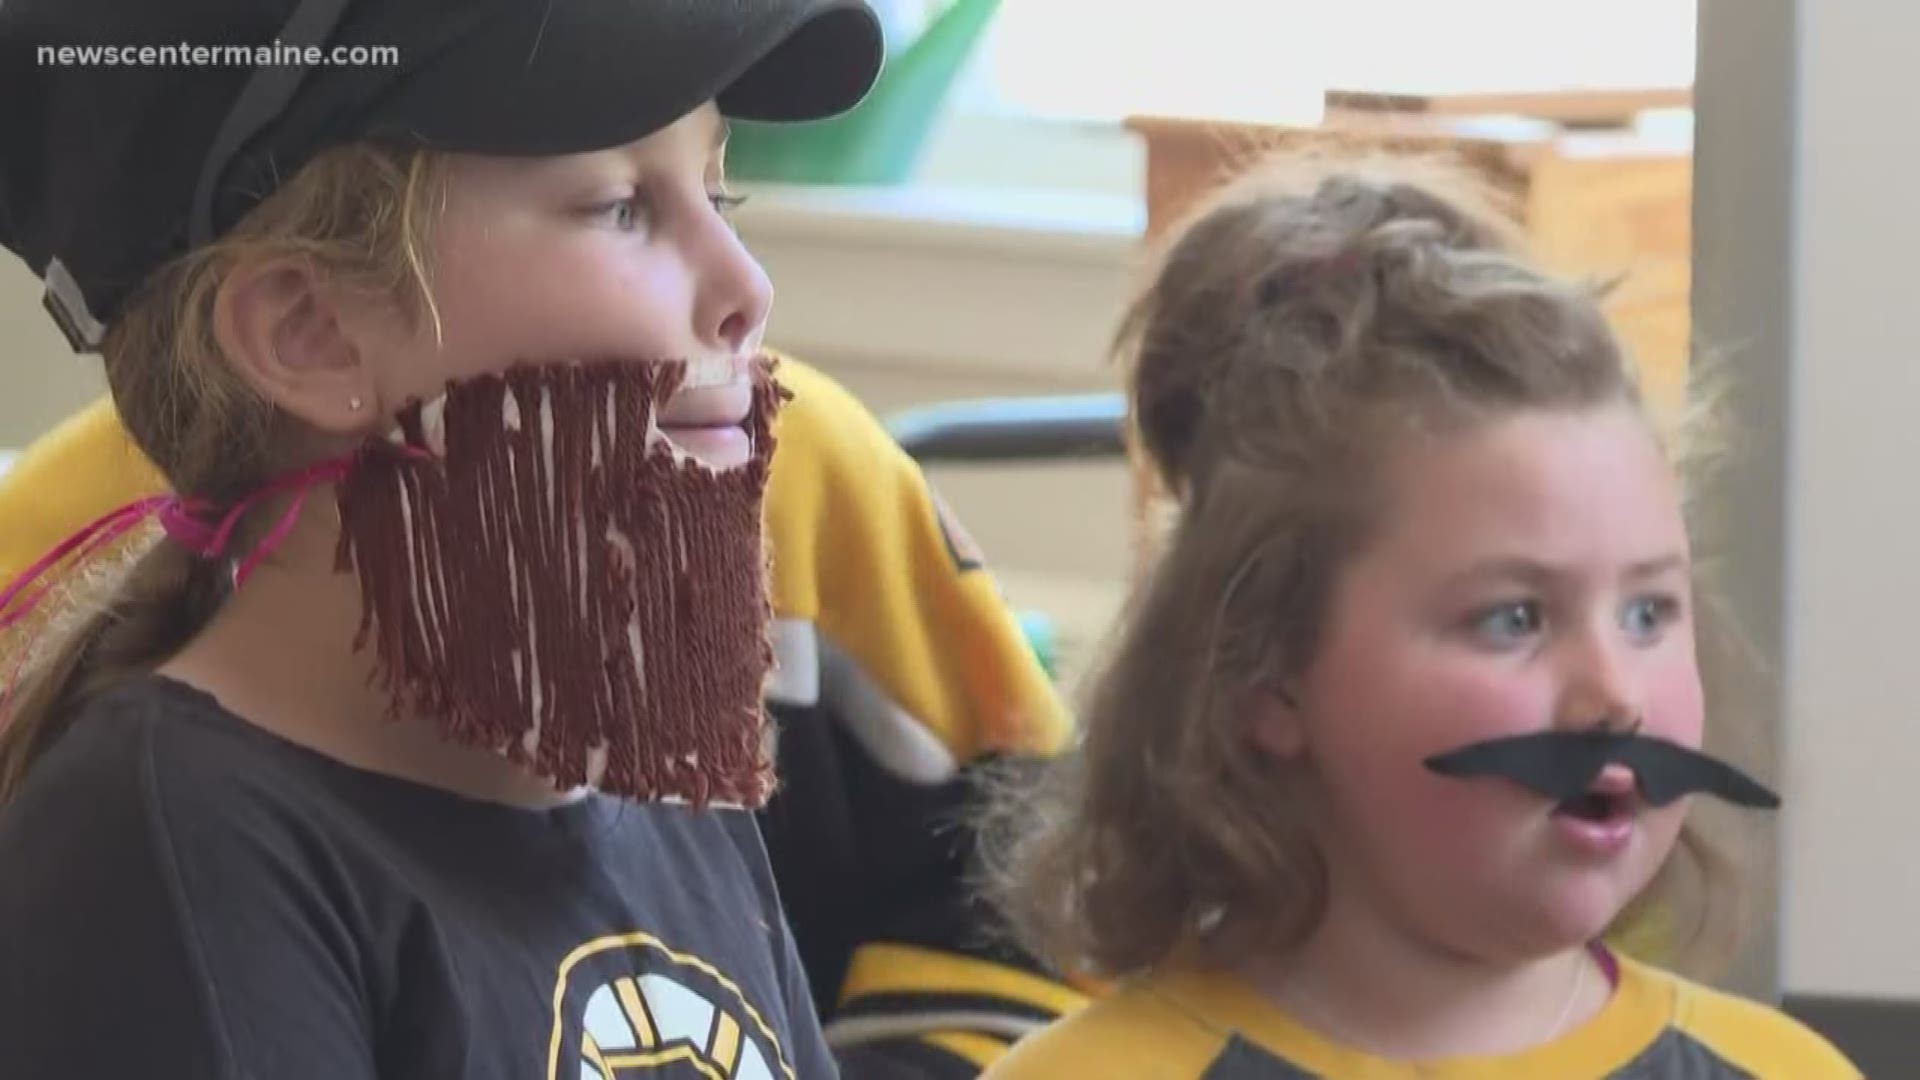 An Auburn teacher grew a beard in 2011, and the Bruins won -- so now his students are hoping for a little good luck.